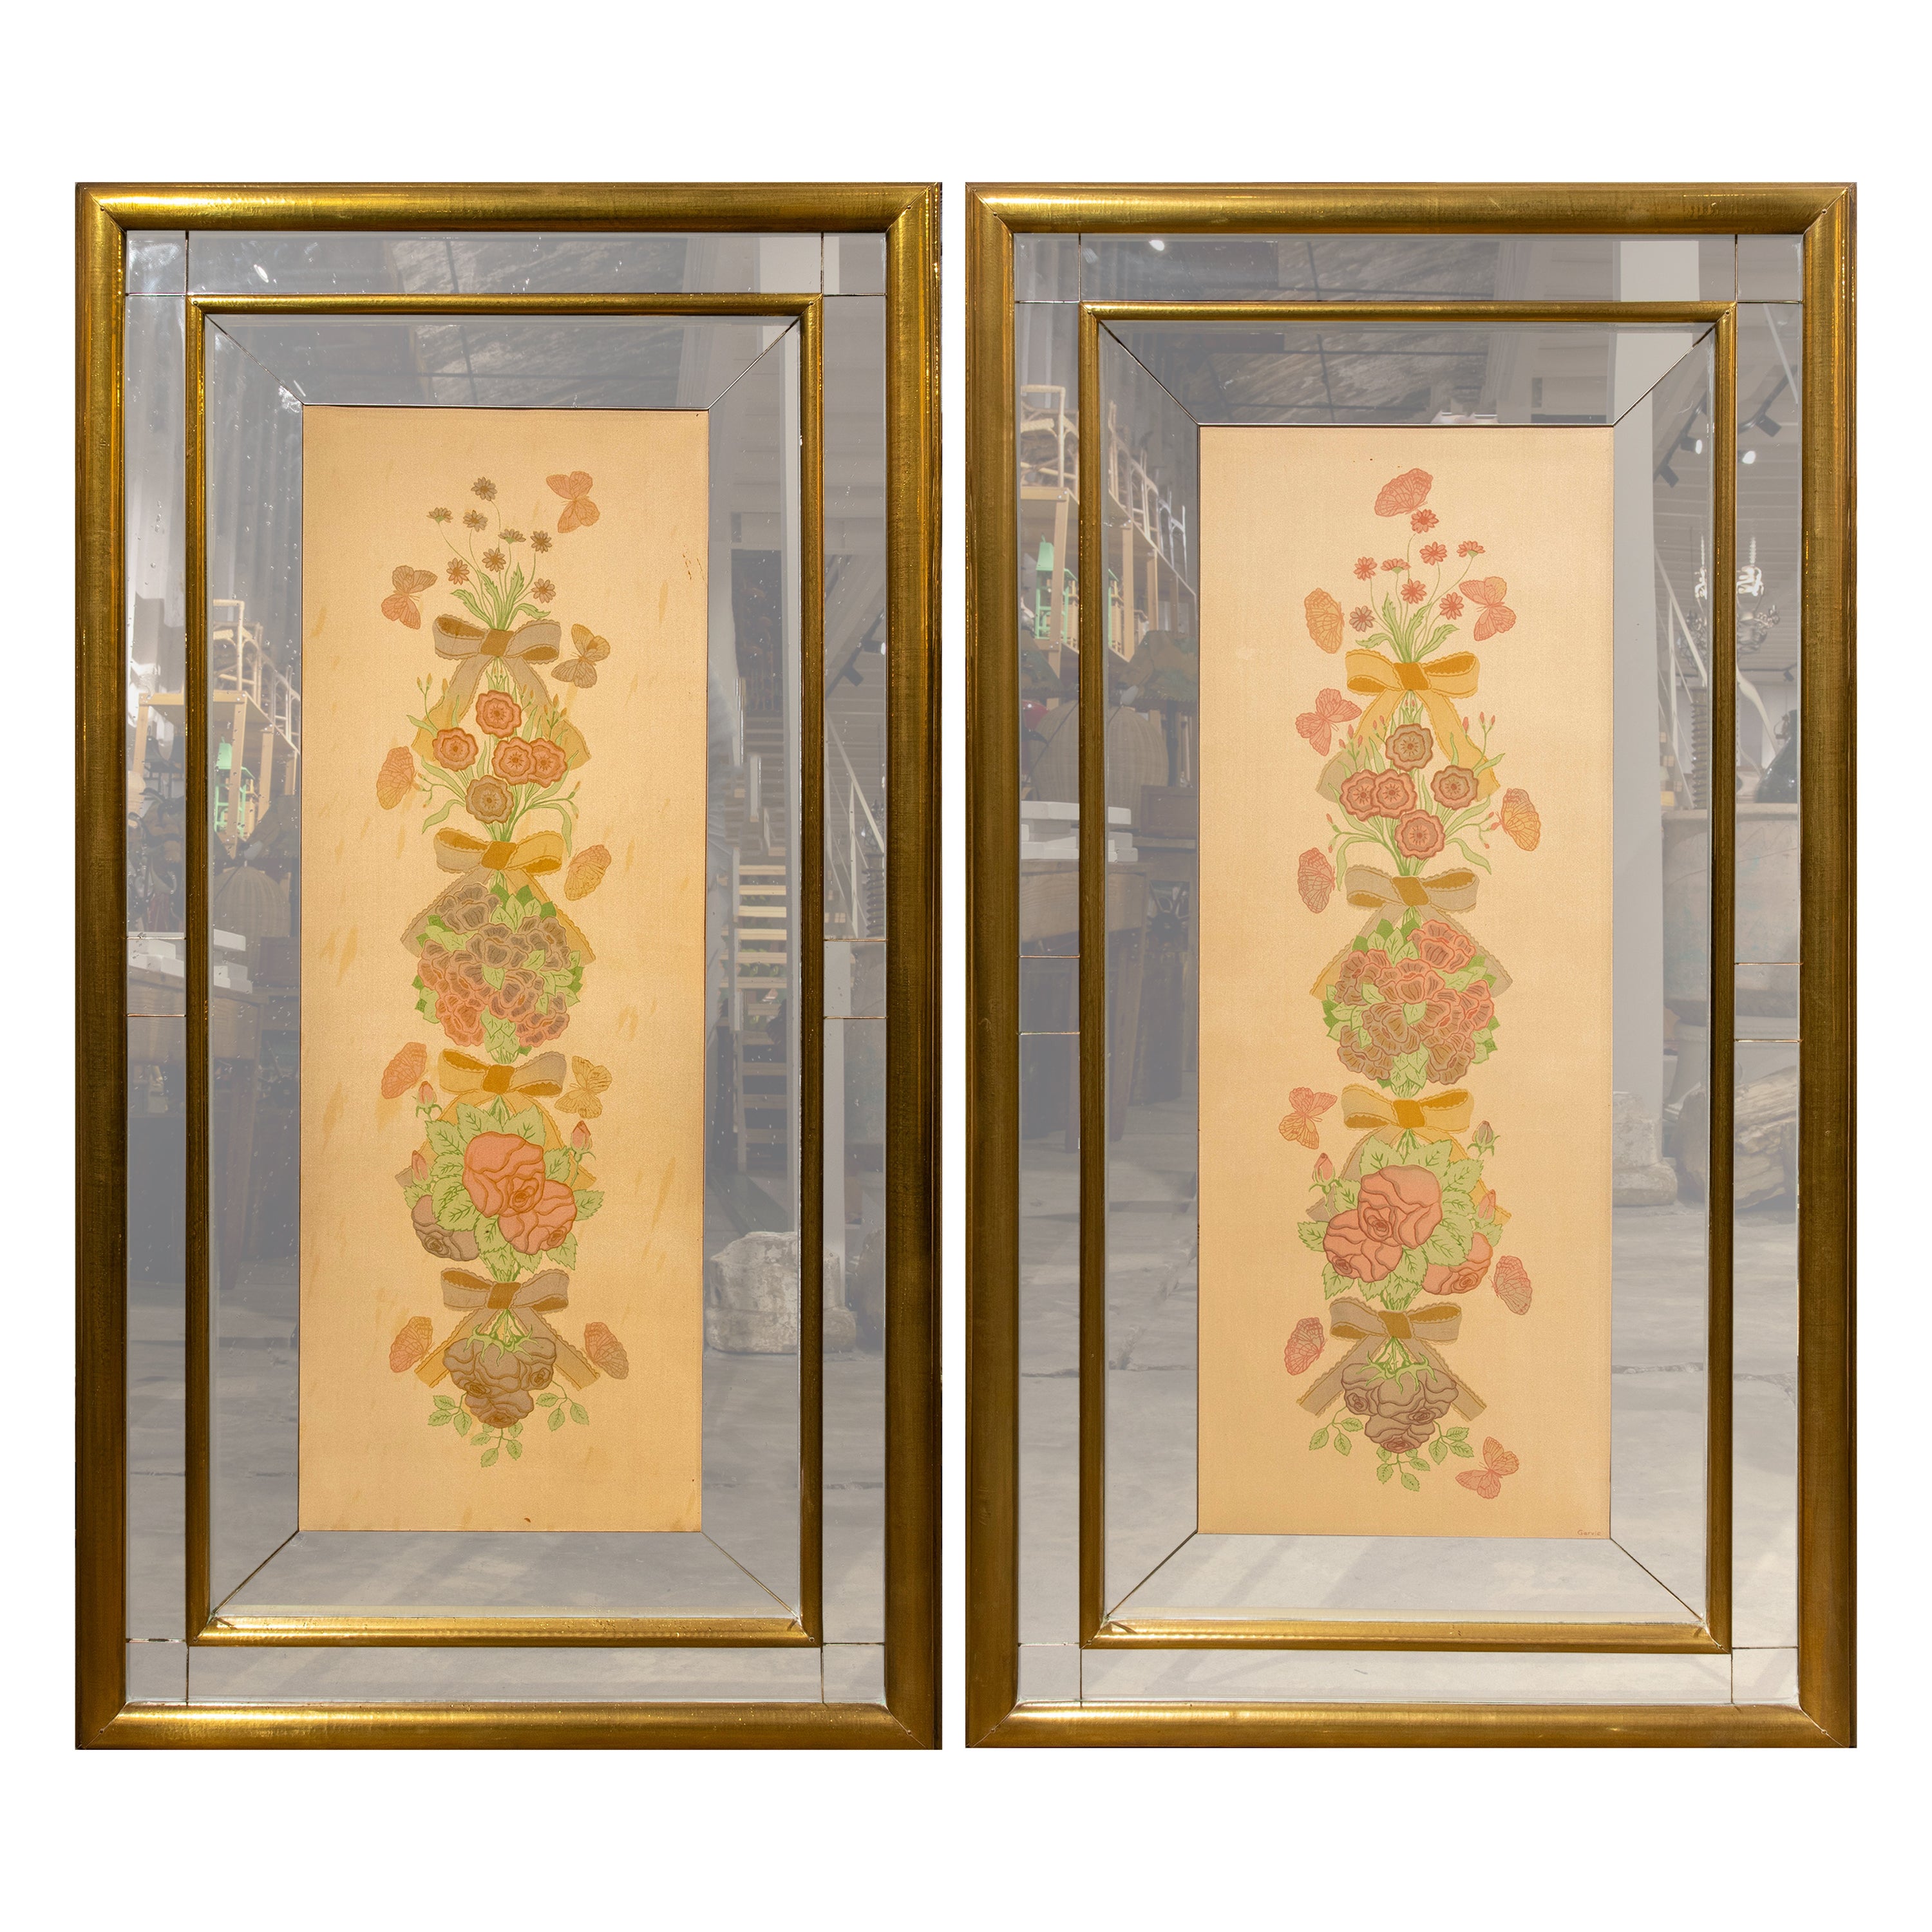 1970s, Pair of Hand-Painted Flower Paintings on Silk with Brass Plated Frames For Sale